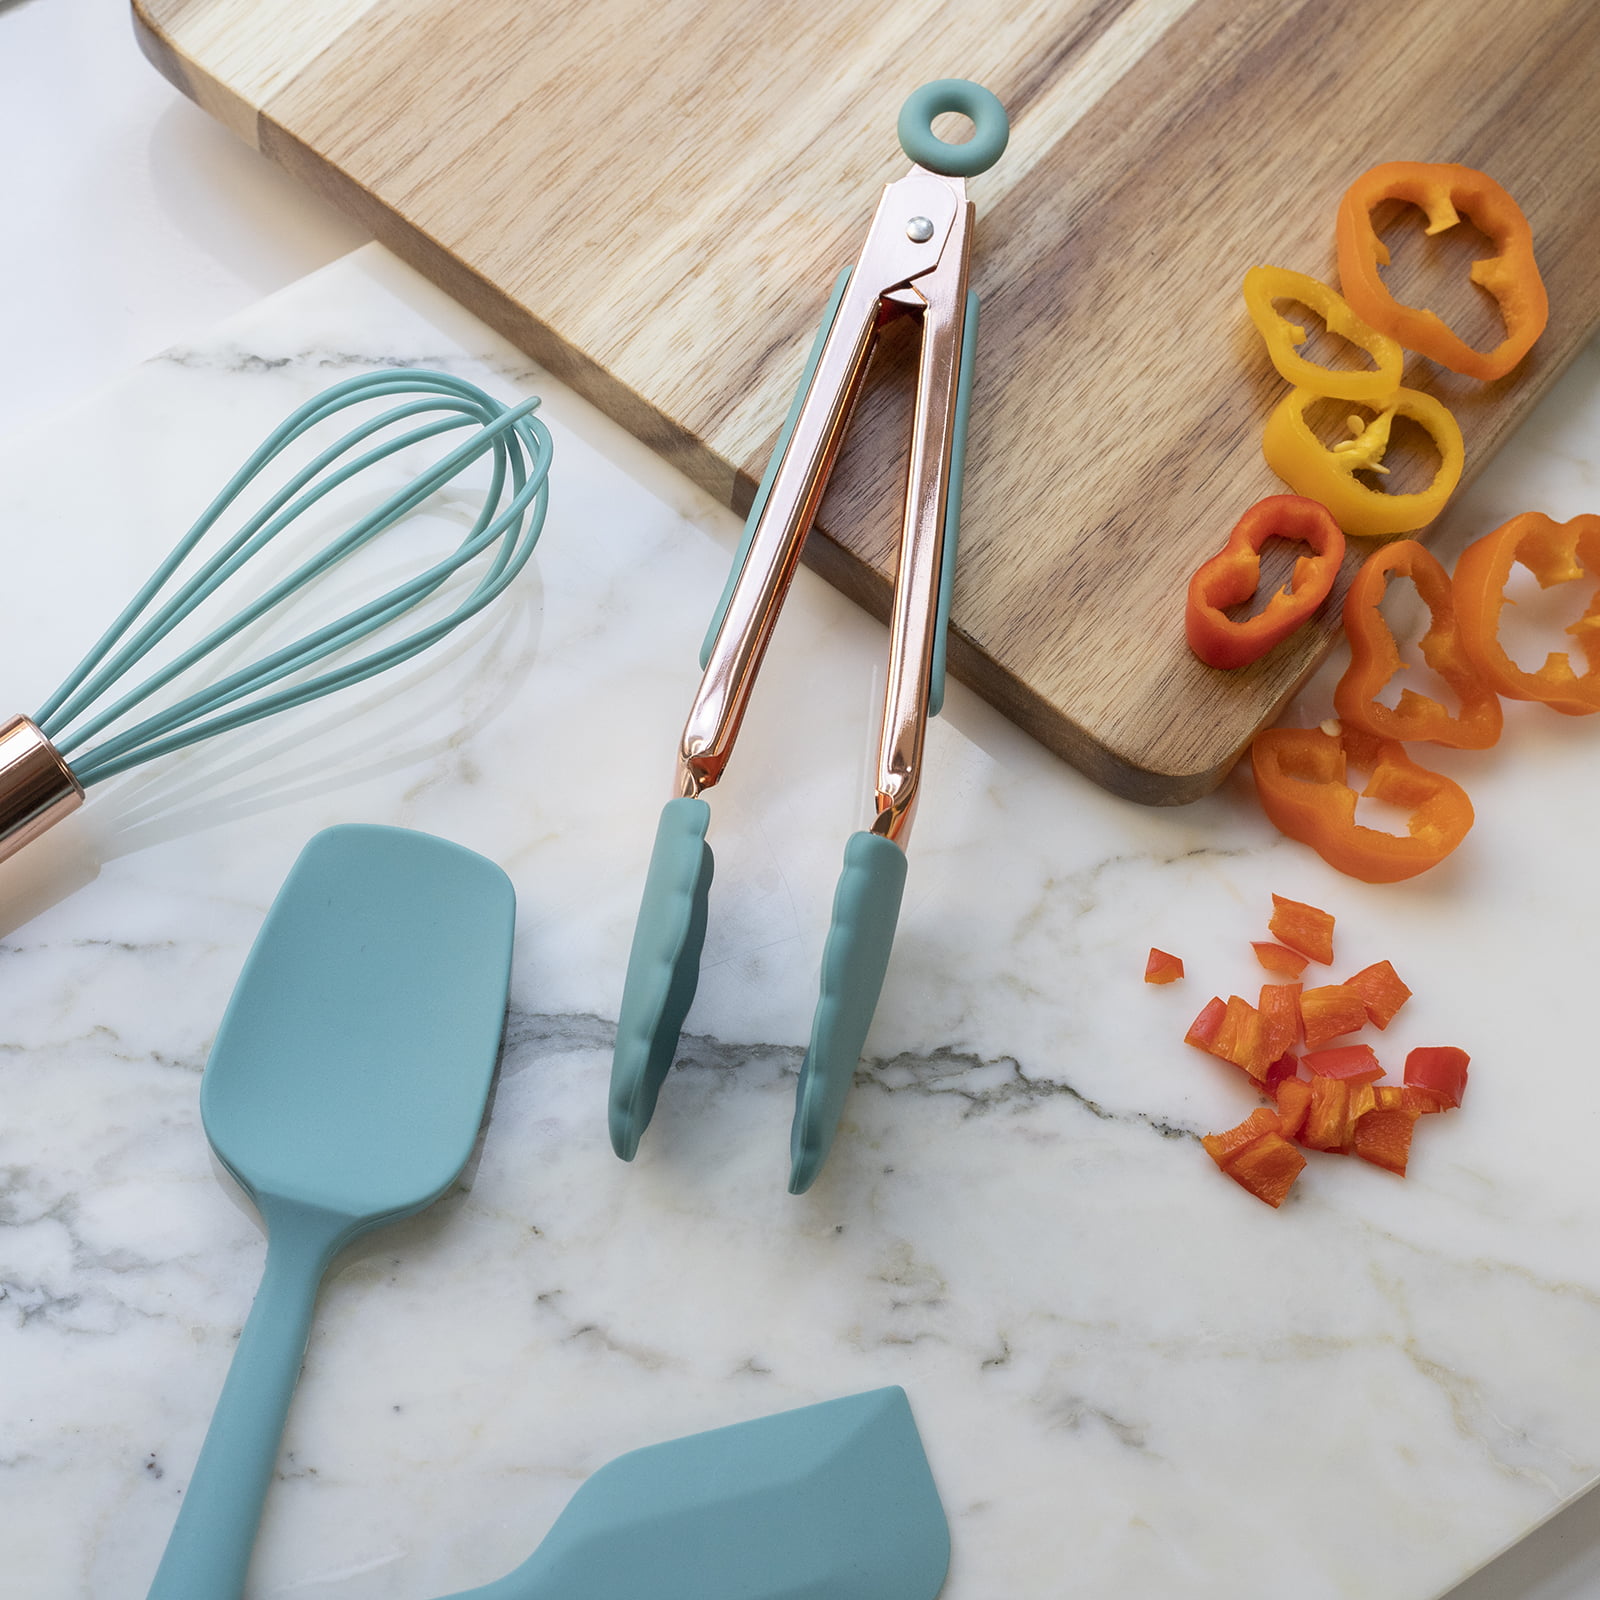 Cook with Color 3 Piece Color Changing Silicone Utensil Set with Pink Tong,  Teal Slotted Turner, and Yellow Spoon 